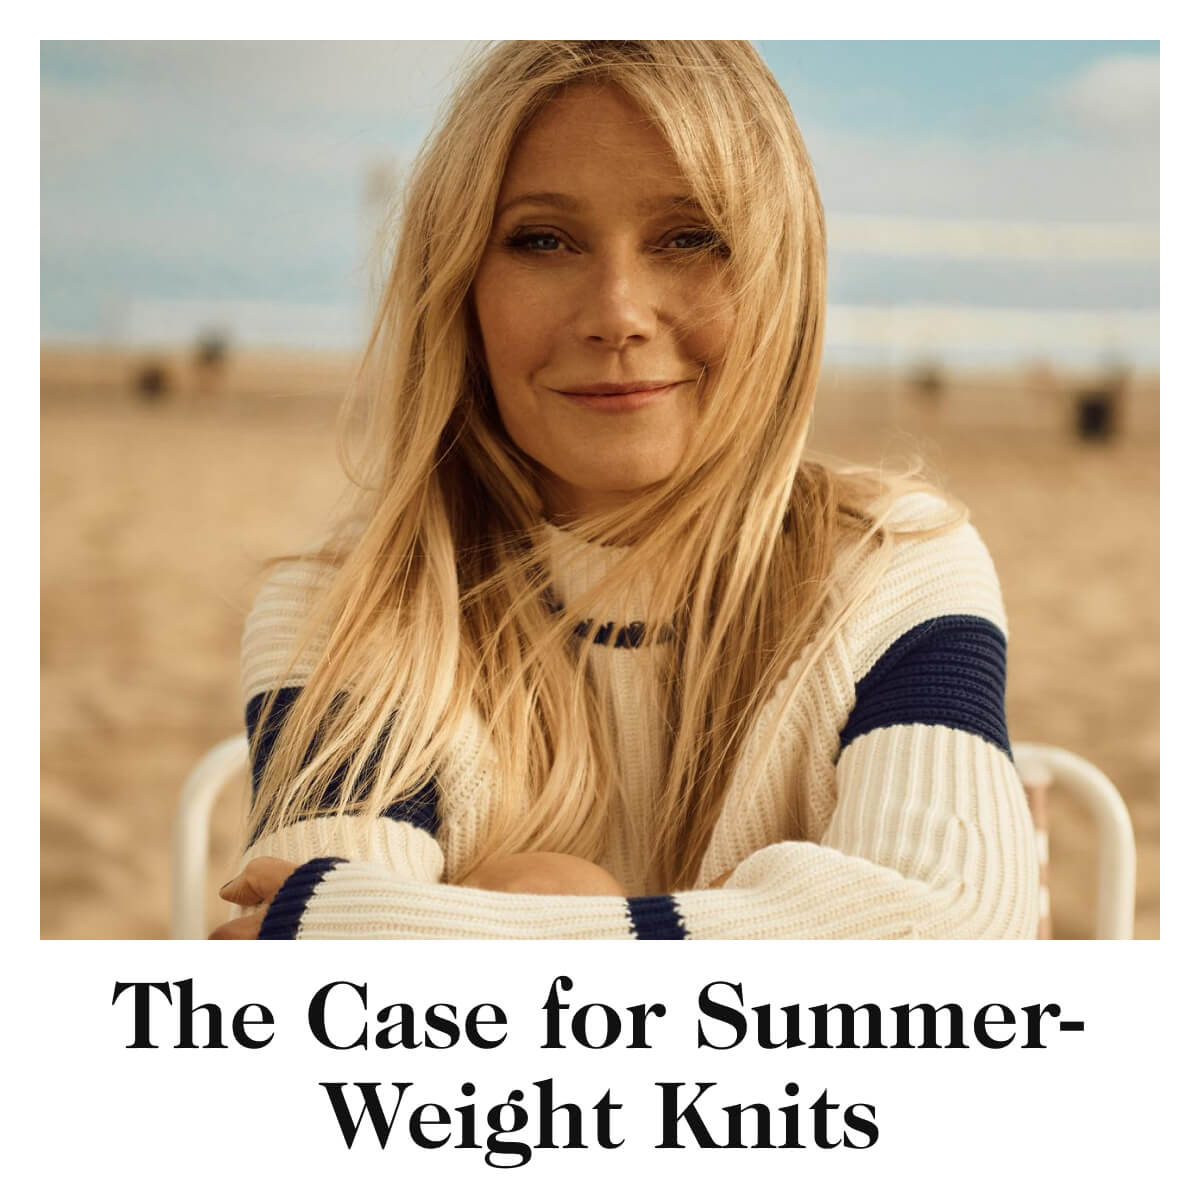 The Case for Summer-Weight Knits